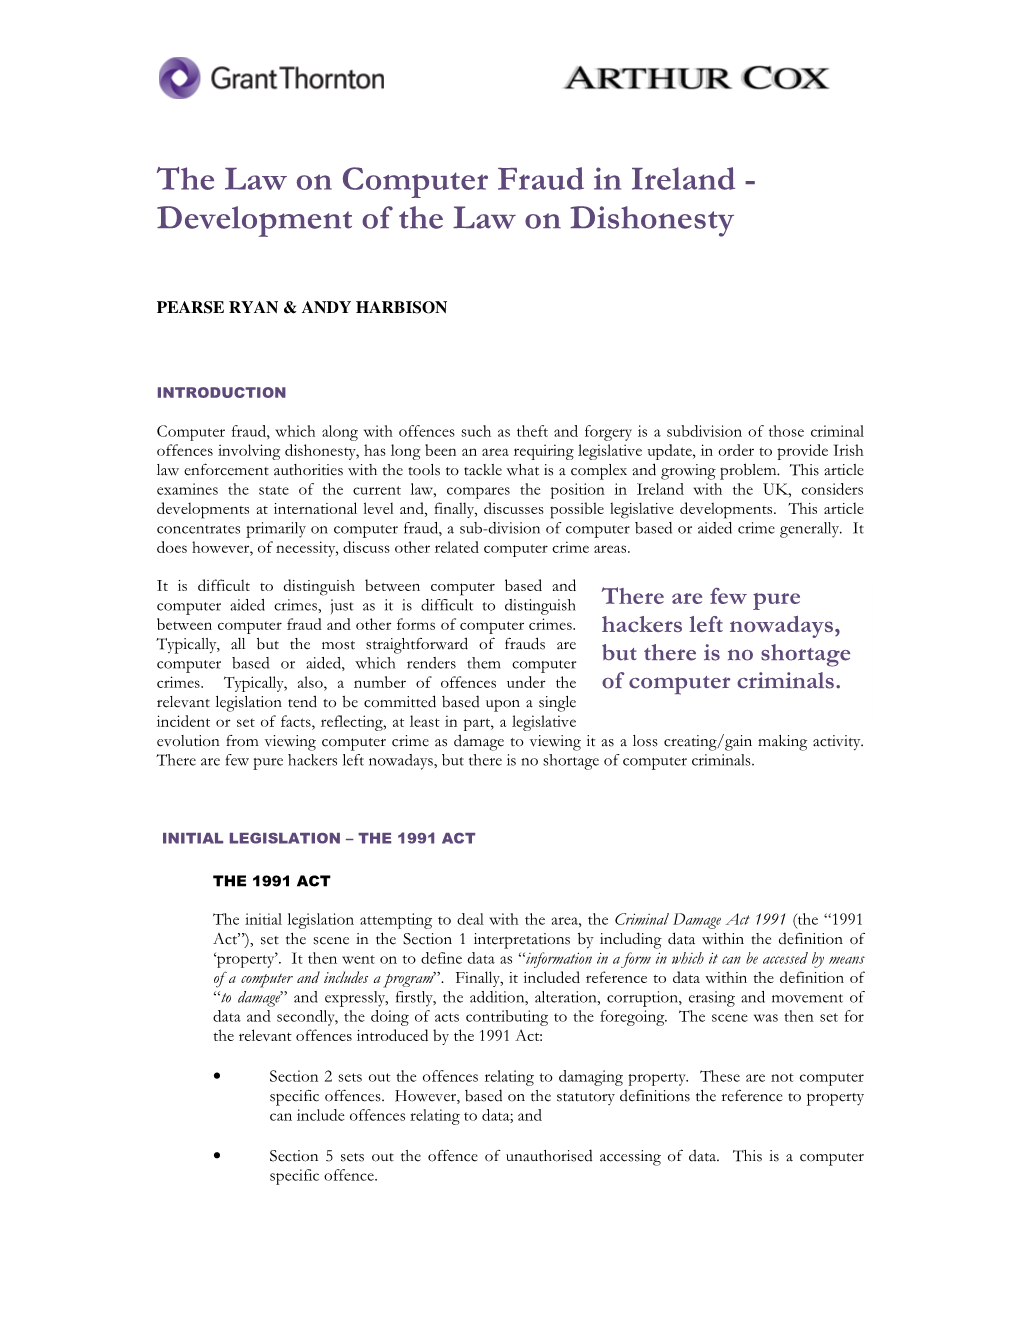 The Law on Computer Fraud in Ireland - Development of the Law on Dishonesty